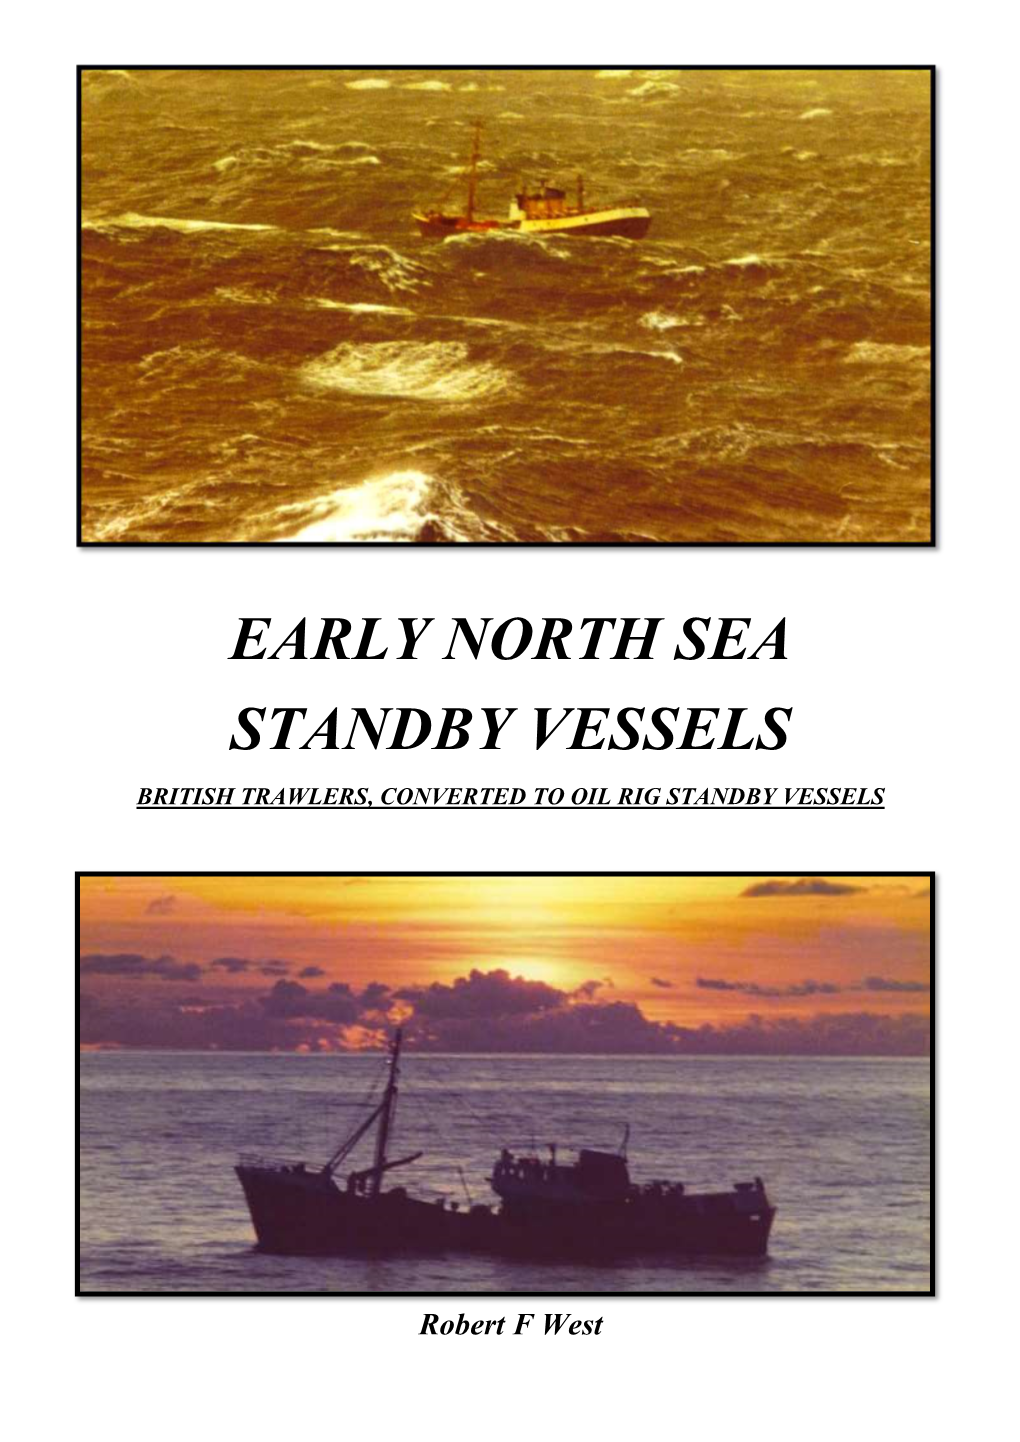 Early North Sea Standby Vessels British Trawlers, Converted to Oil Rig Standby Vessels